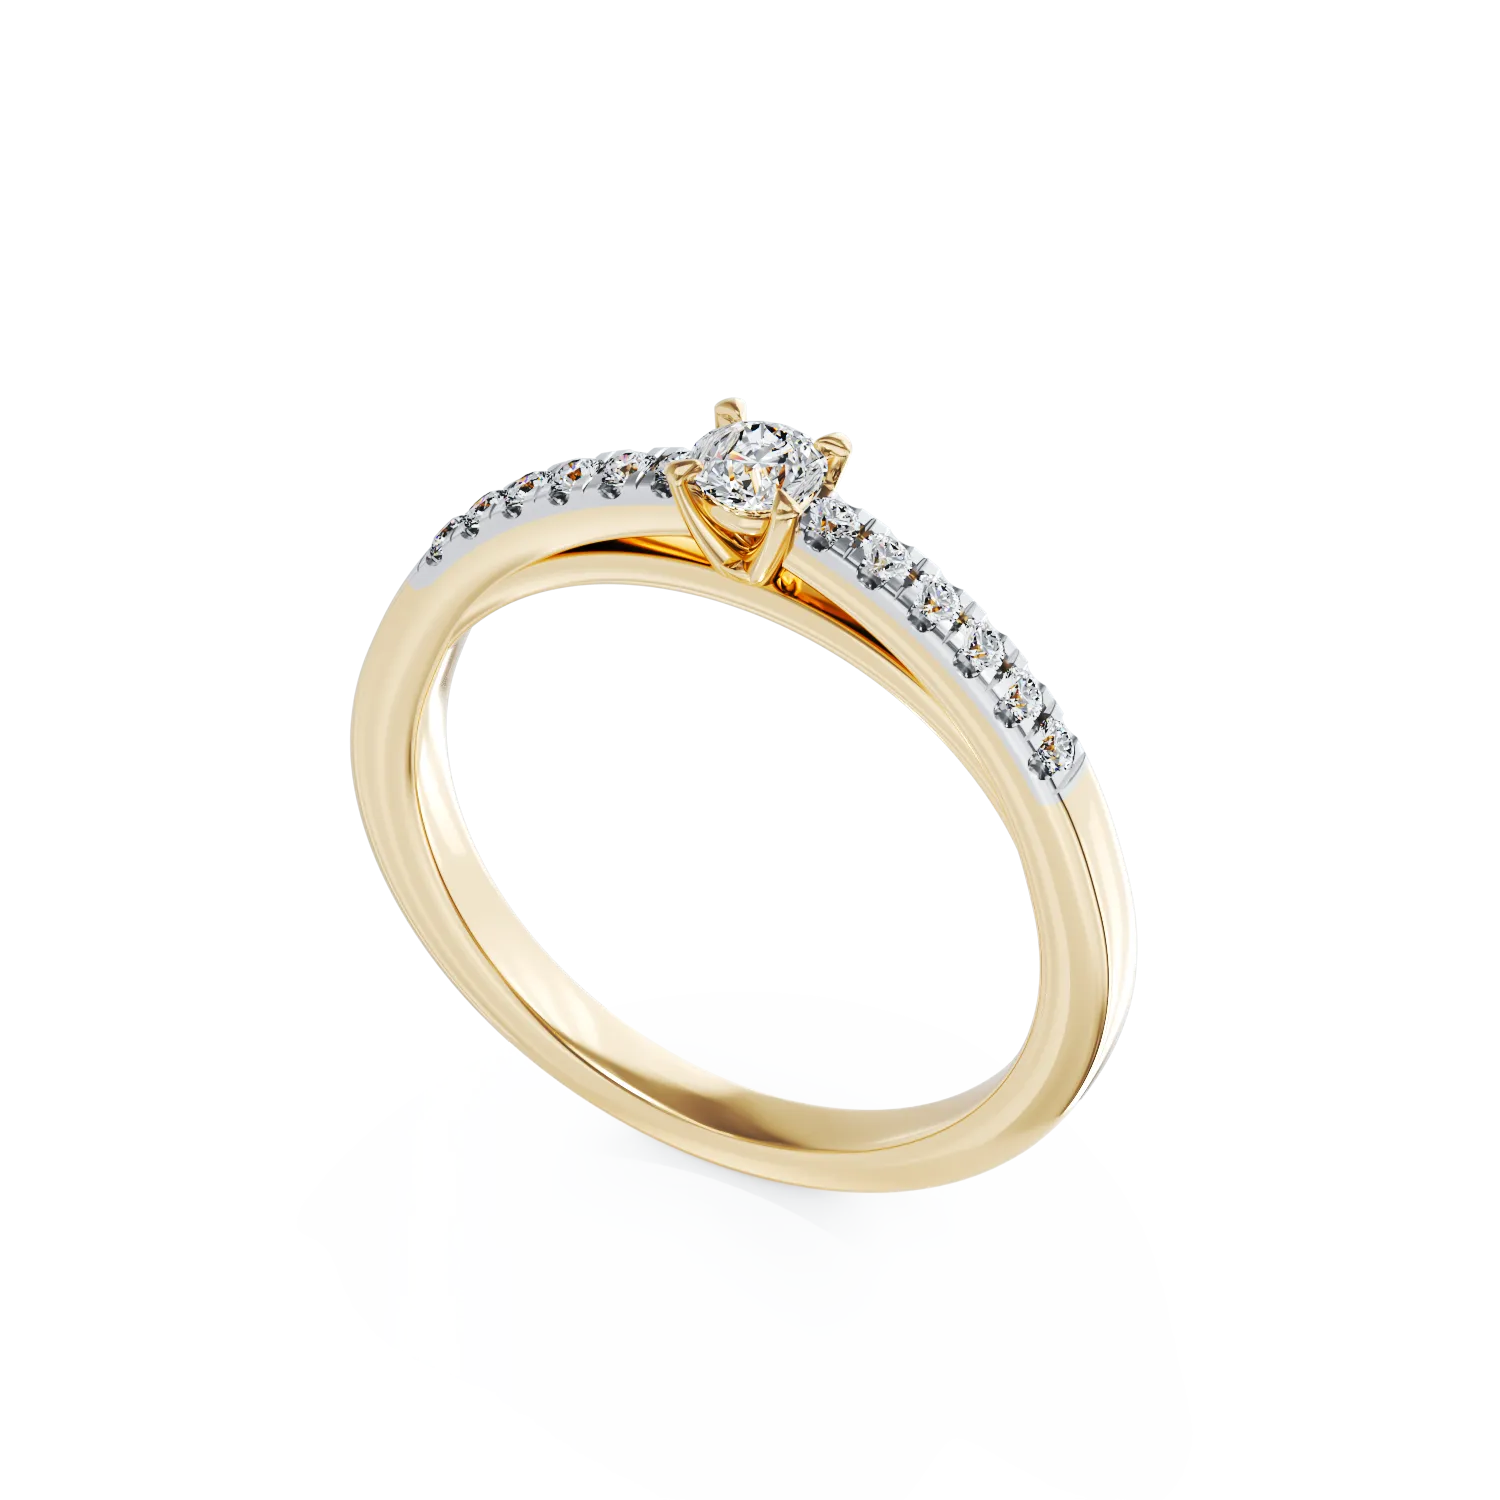 Yellow gold engagement ring with 0.4ct diamonds